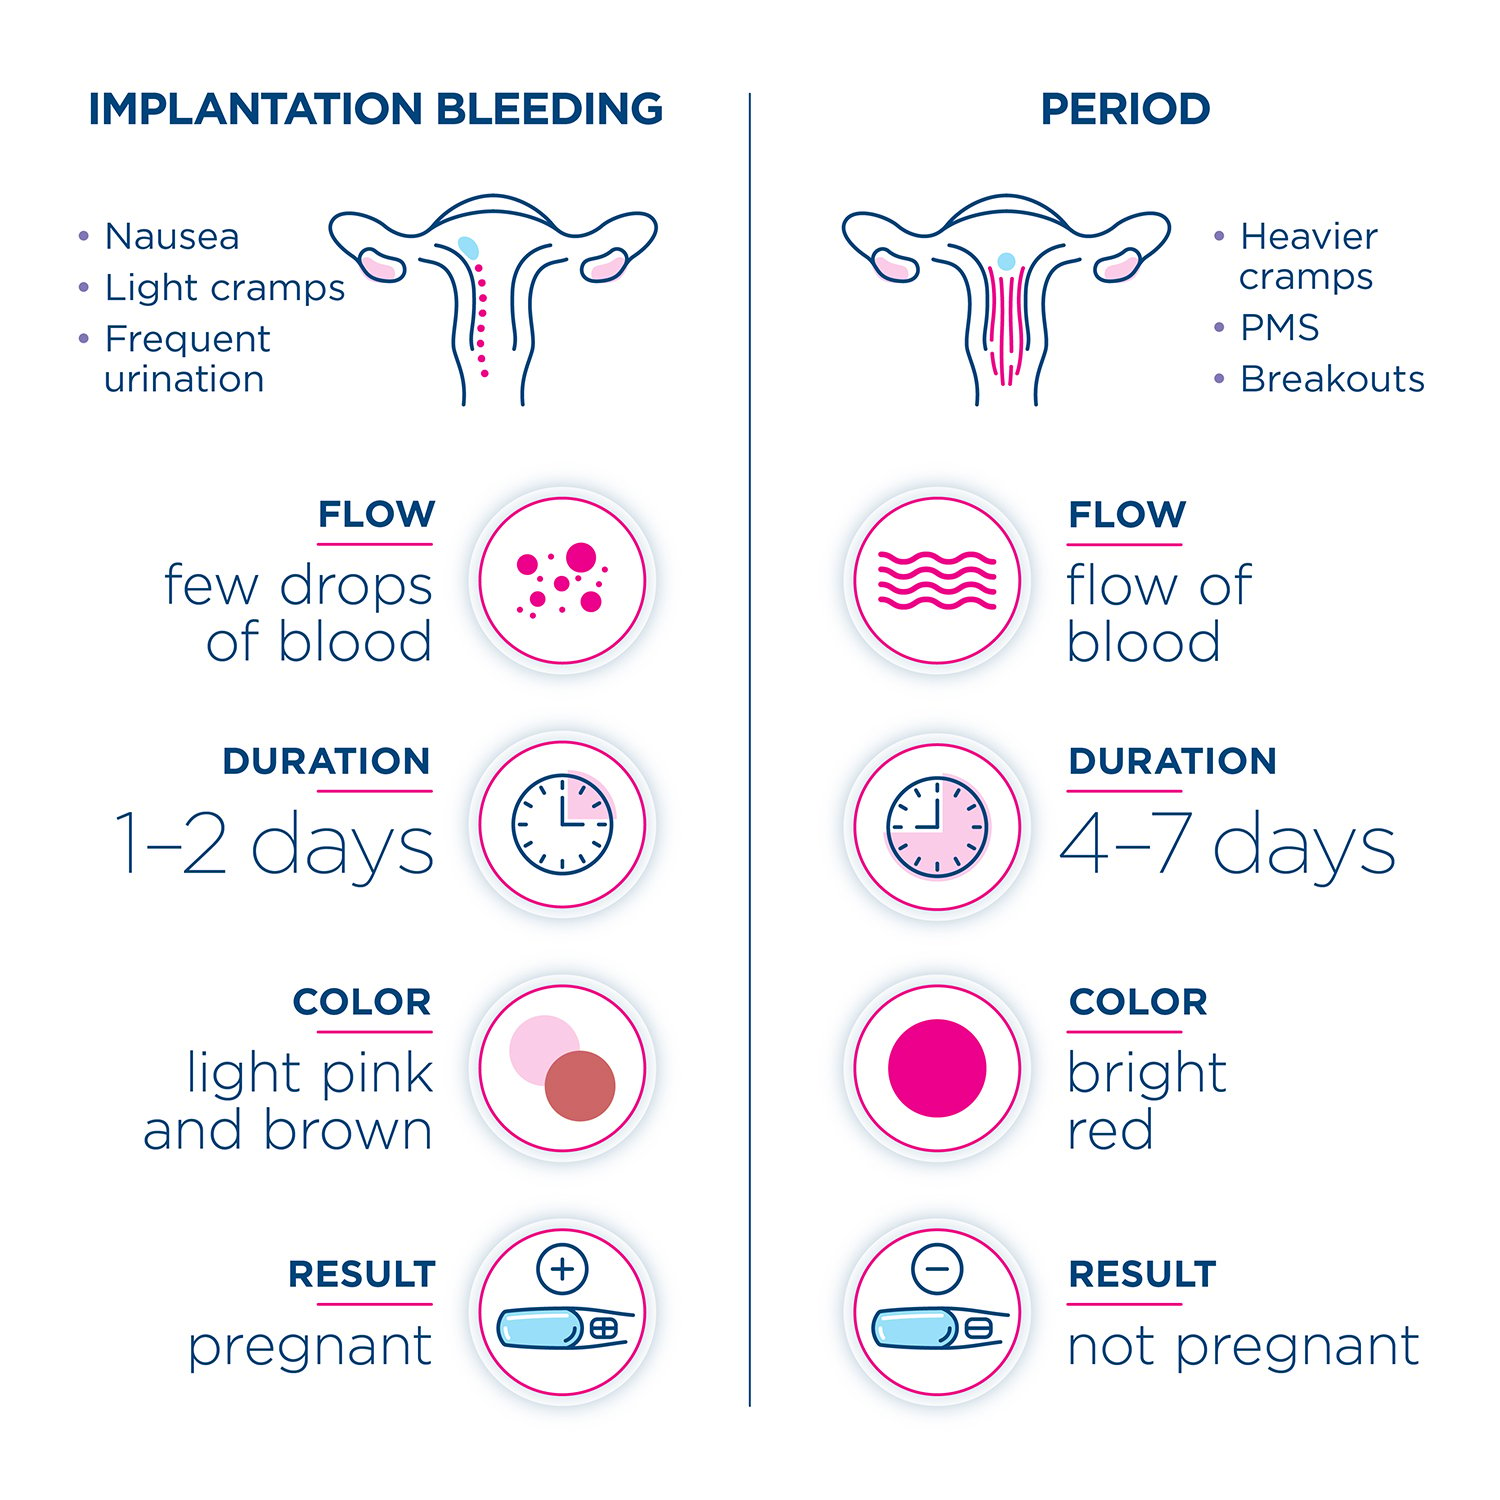 Brown Discharge Before Period: What Causes It and When It's